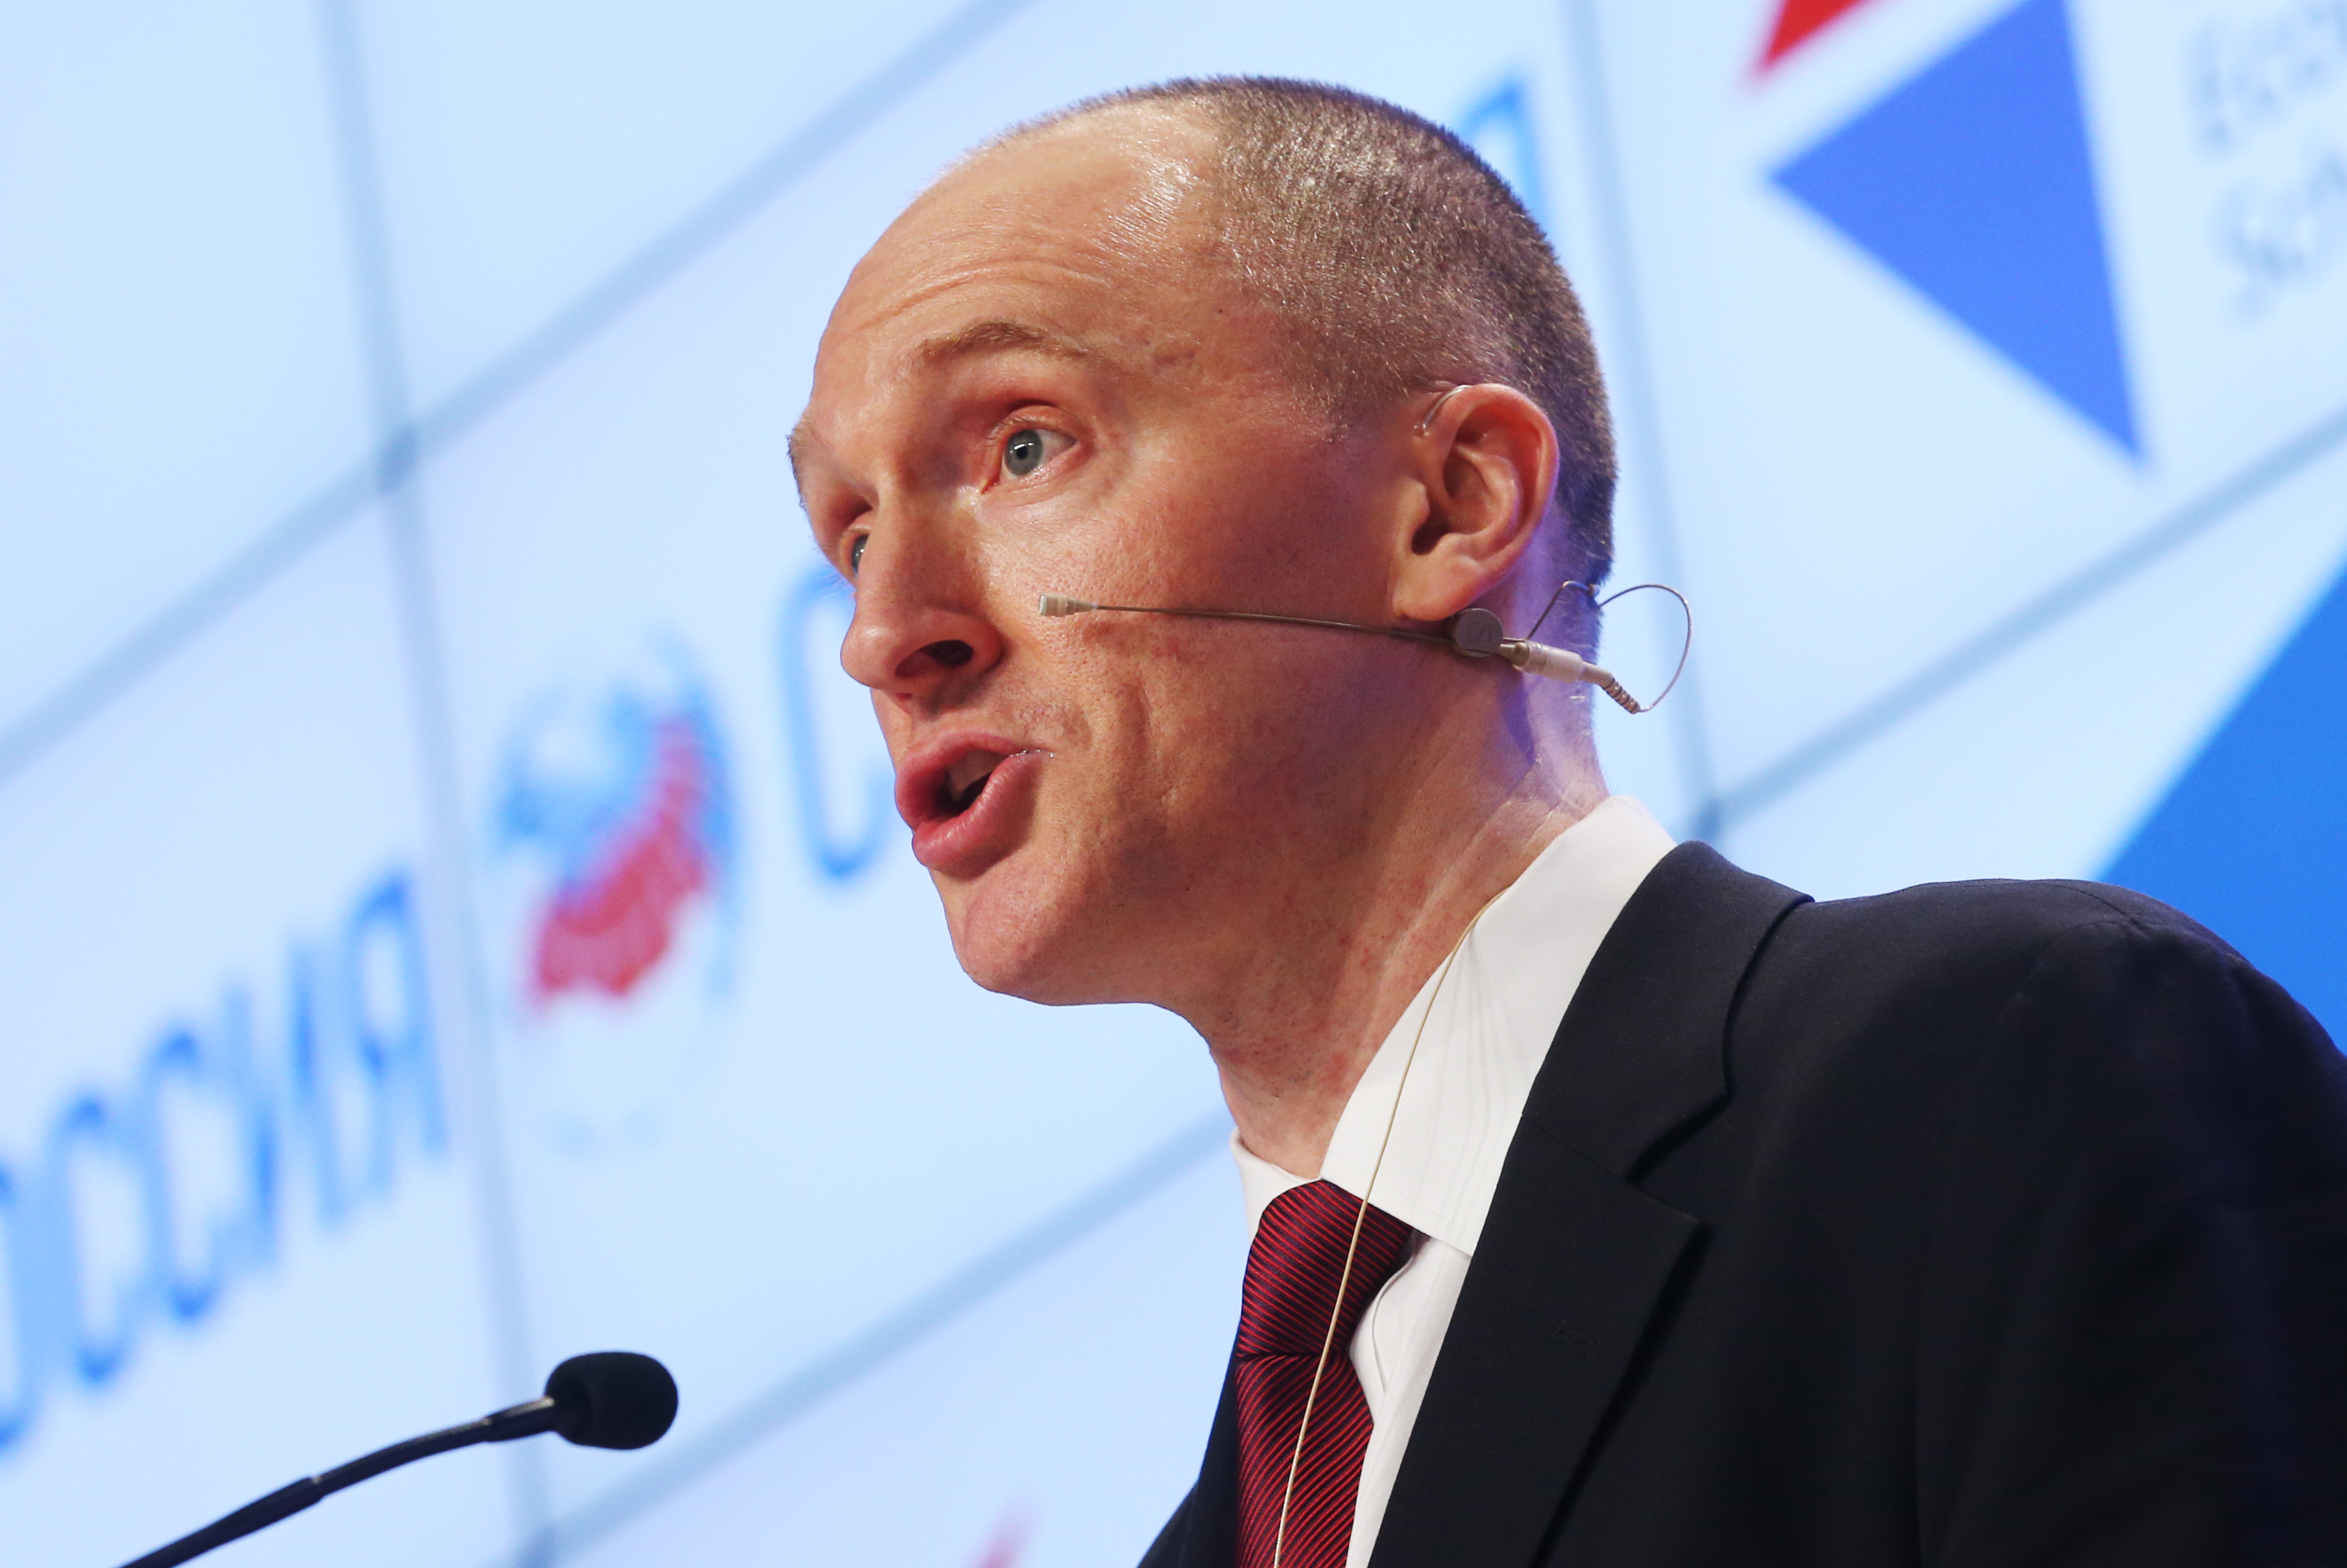 Carter Page makes a presentation during his visit to Moscow on Dec. 12, 2016. (Artyom Korotayev—TASS/Getty Images)